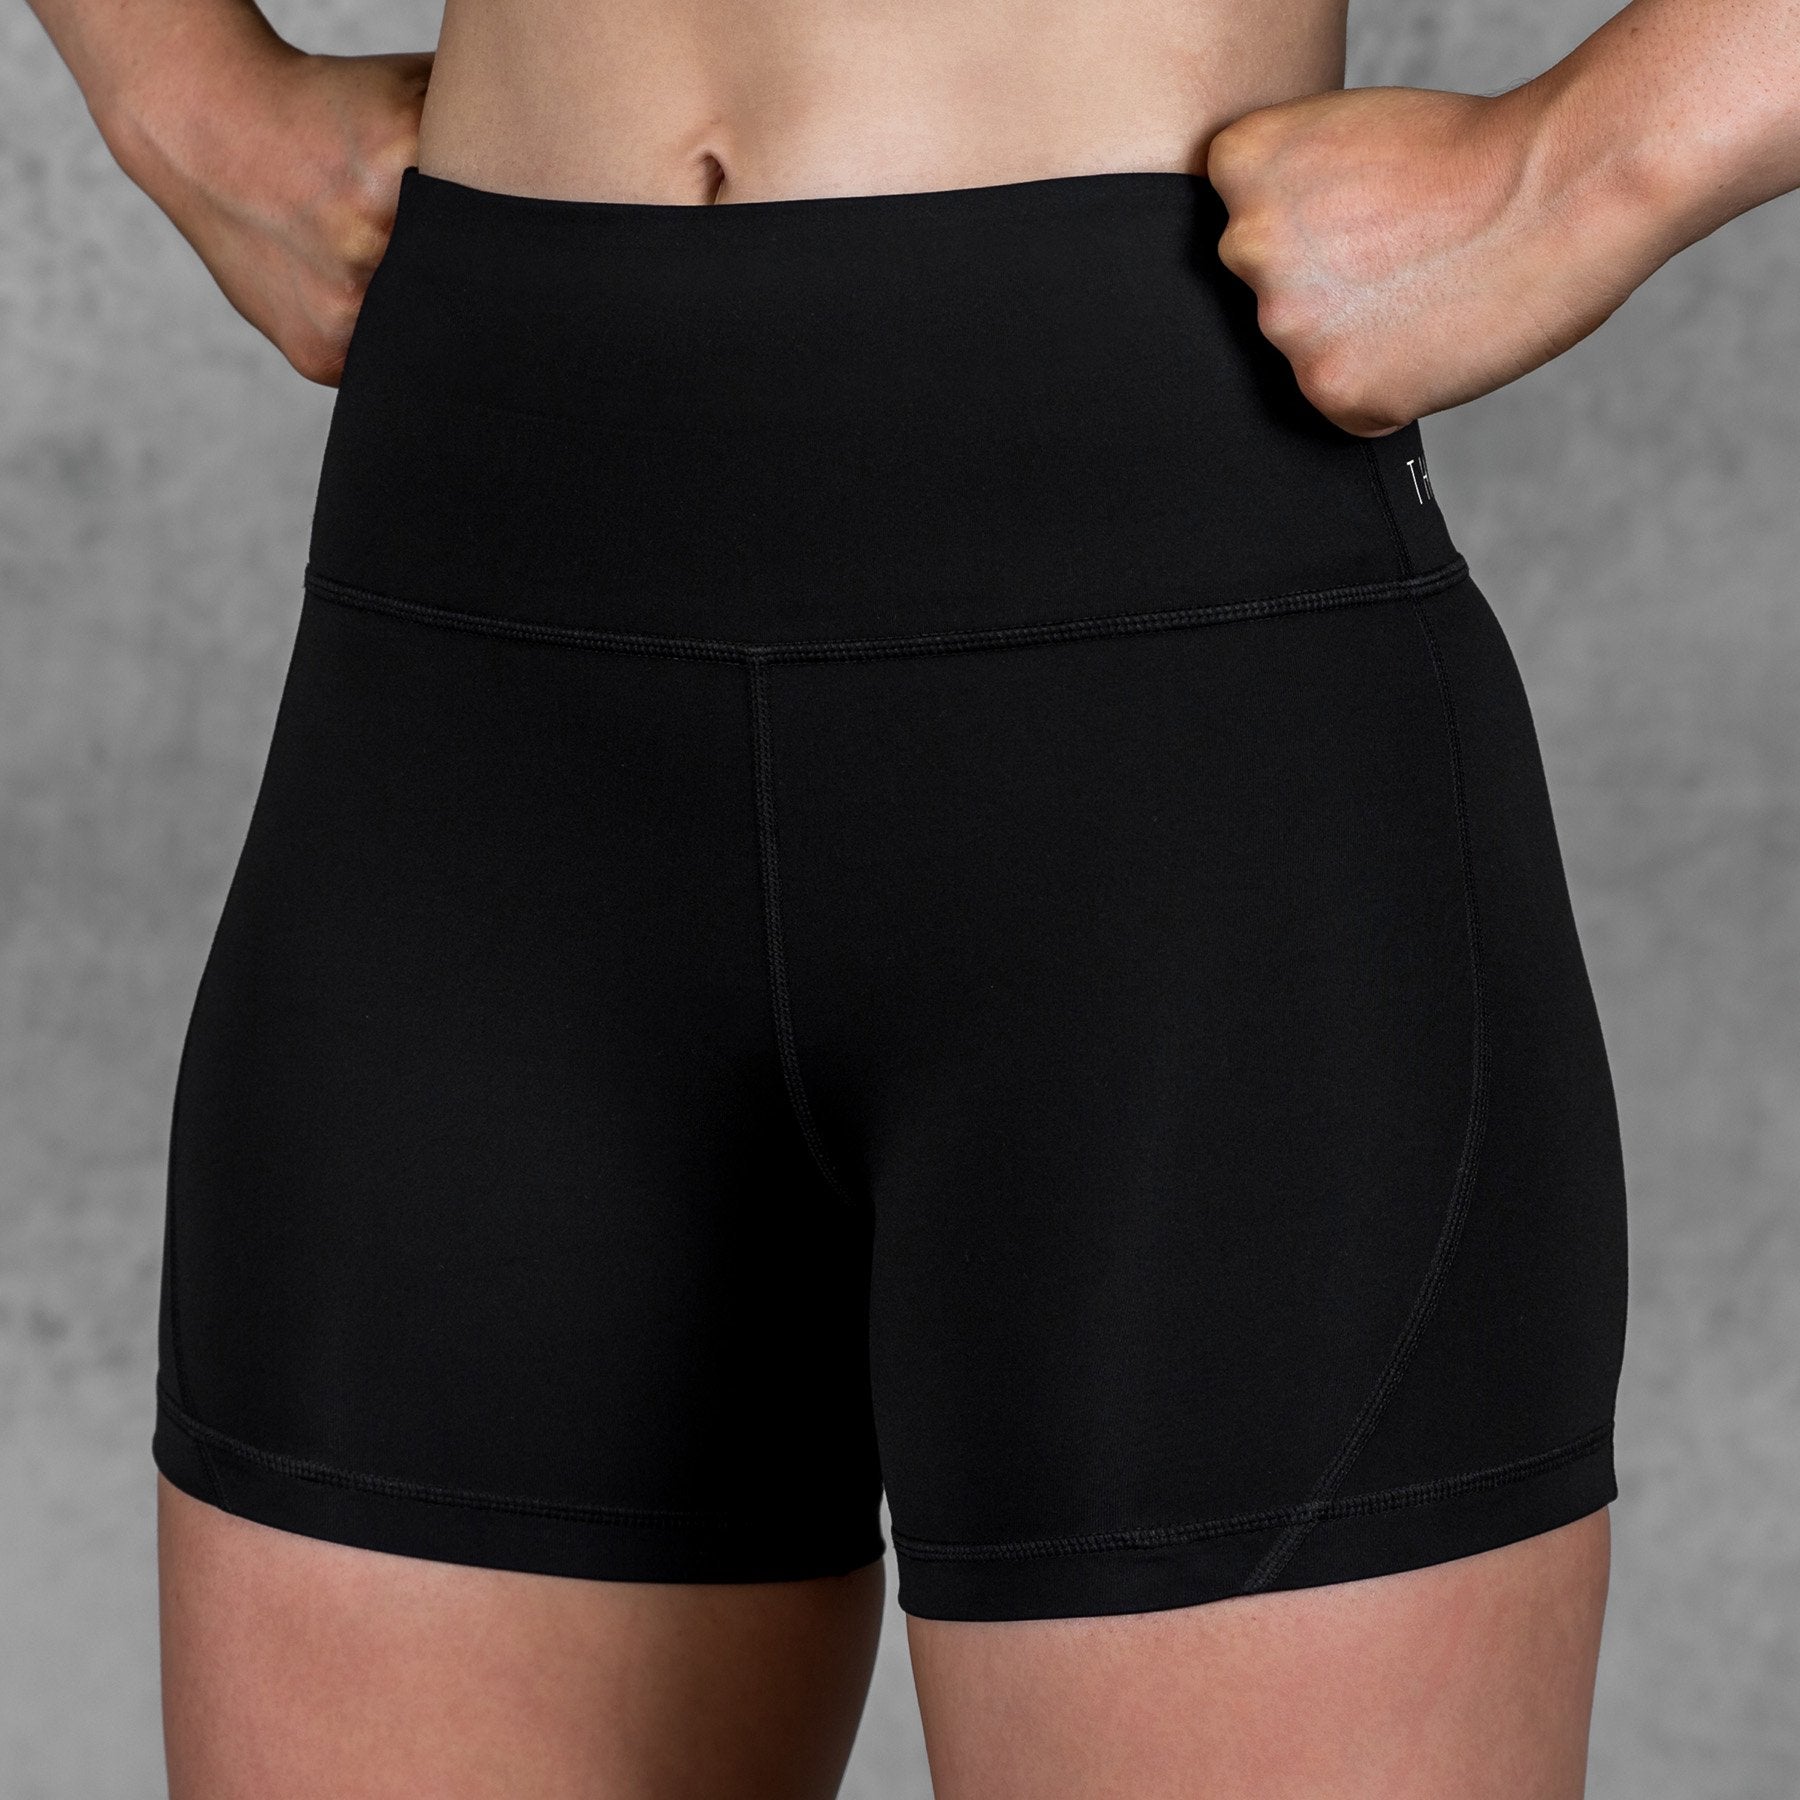 THE BRAVE - WOMEN'S SCULPT HIGH WAISTED BOOTY SHORTS - BLACK